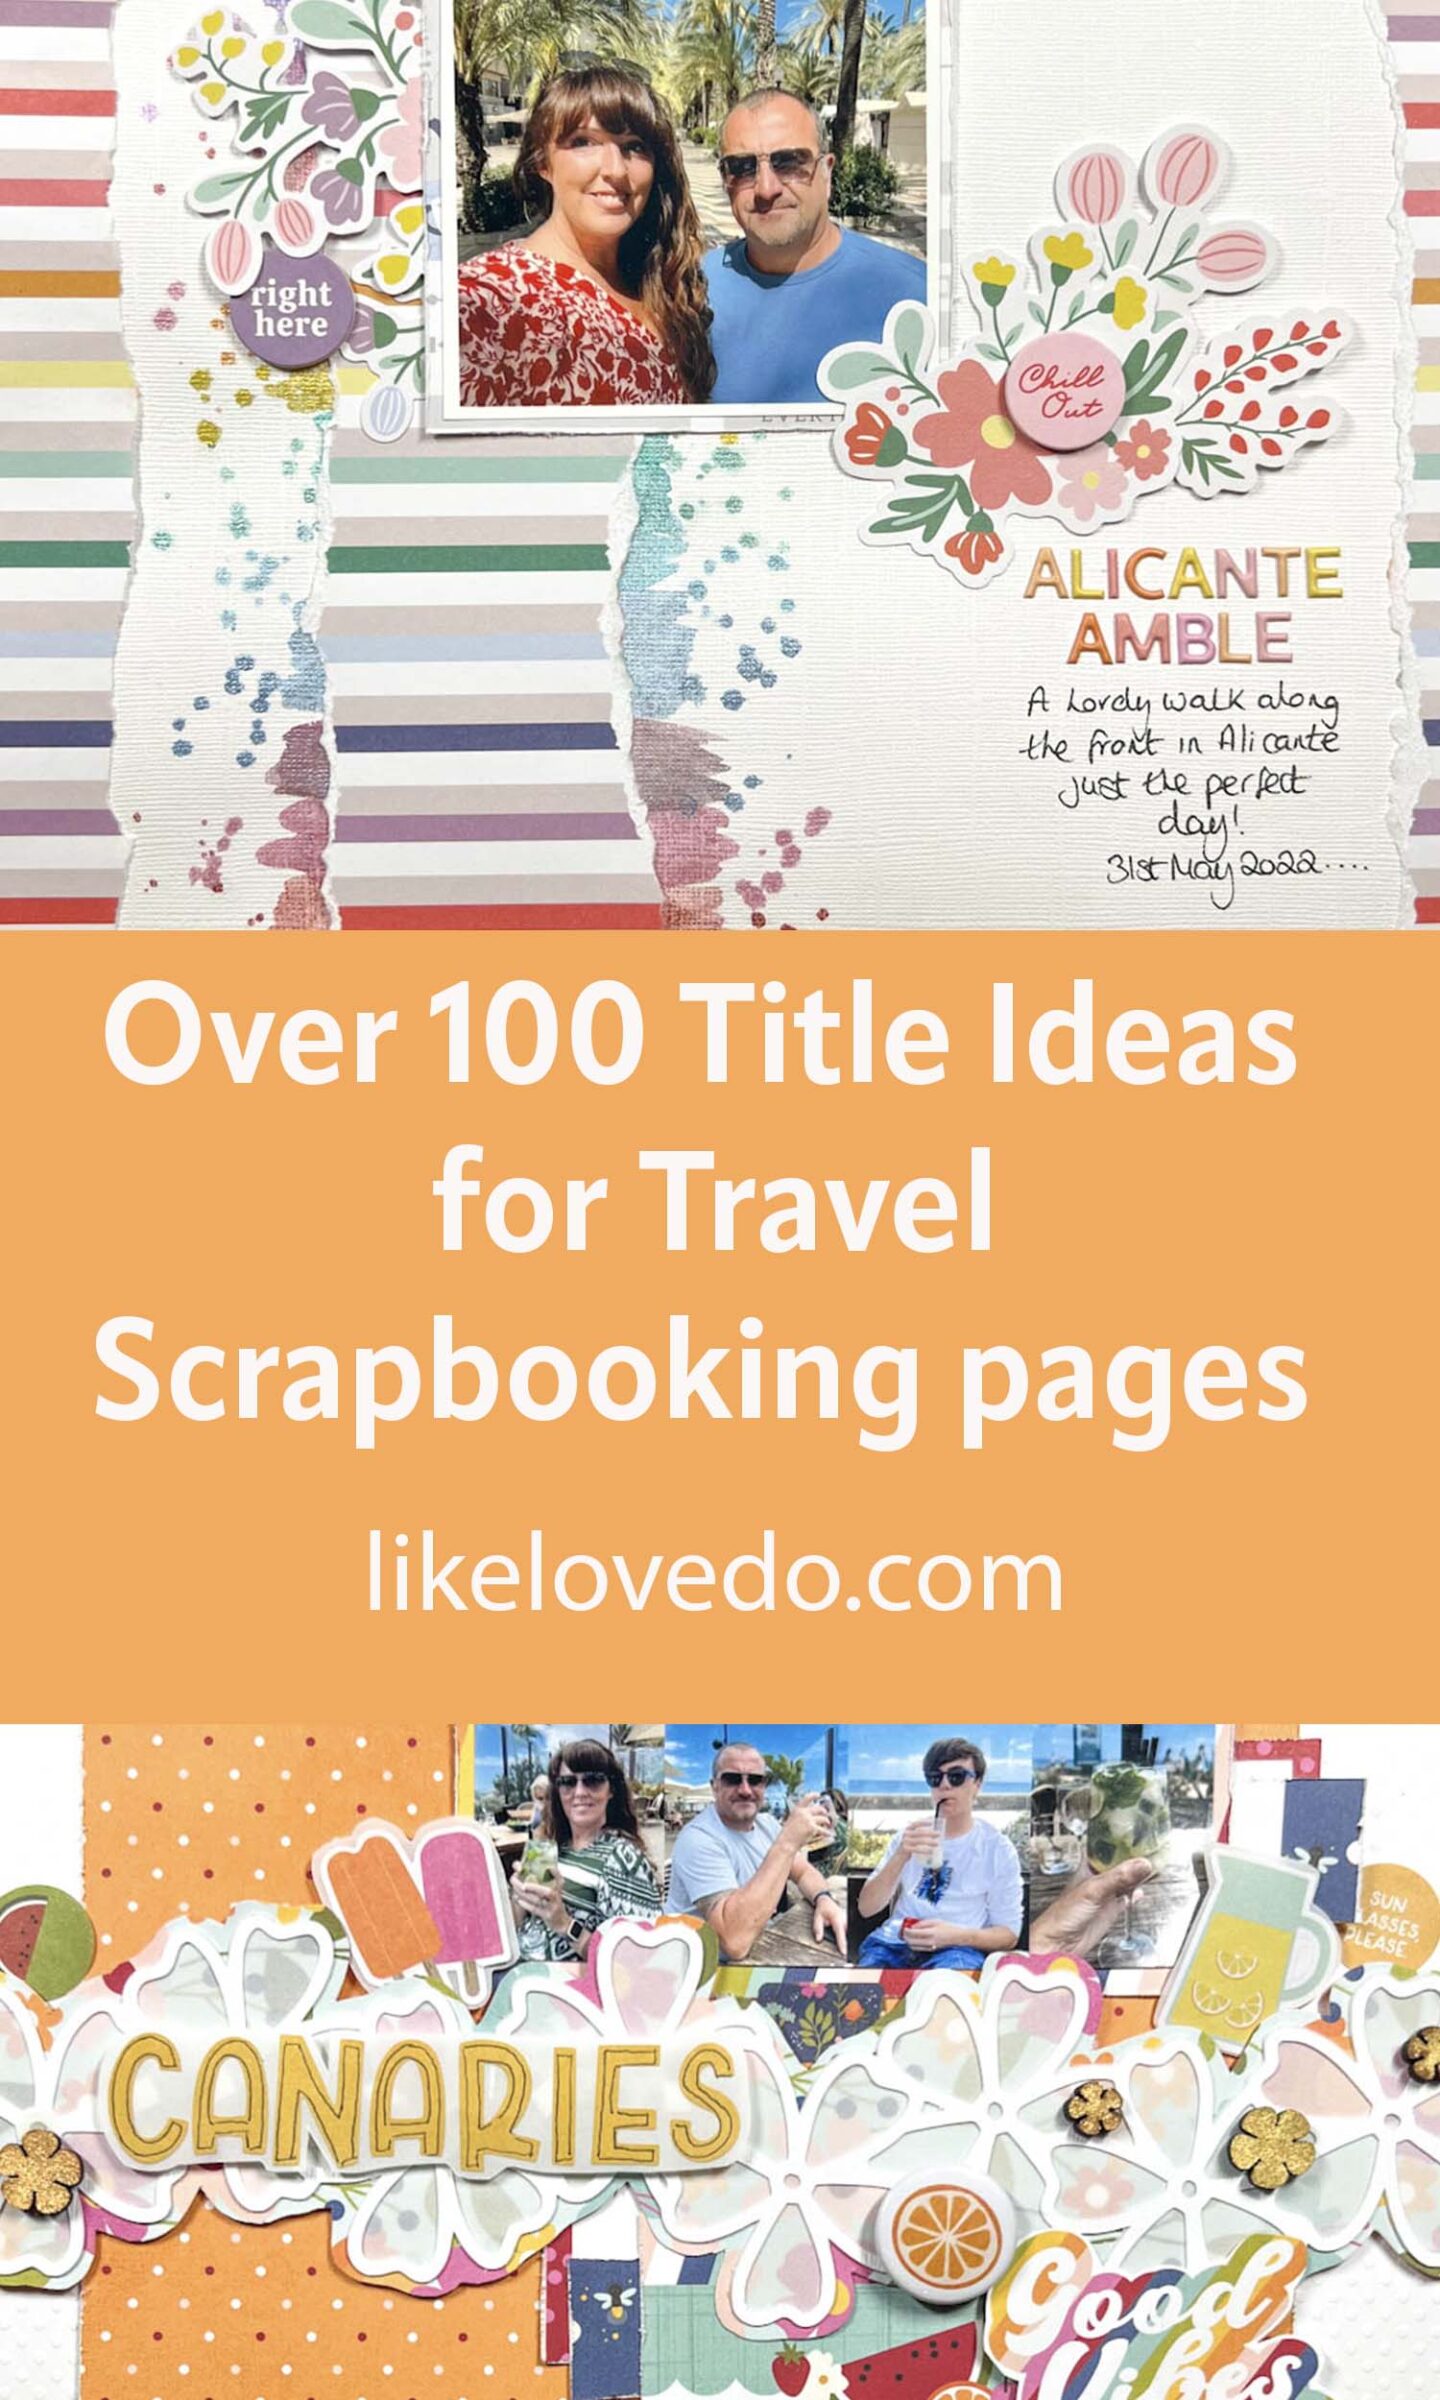 Scrapbooking quotes and tiles for travel inspired pages pin image